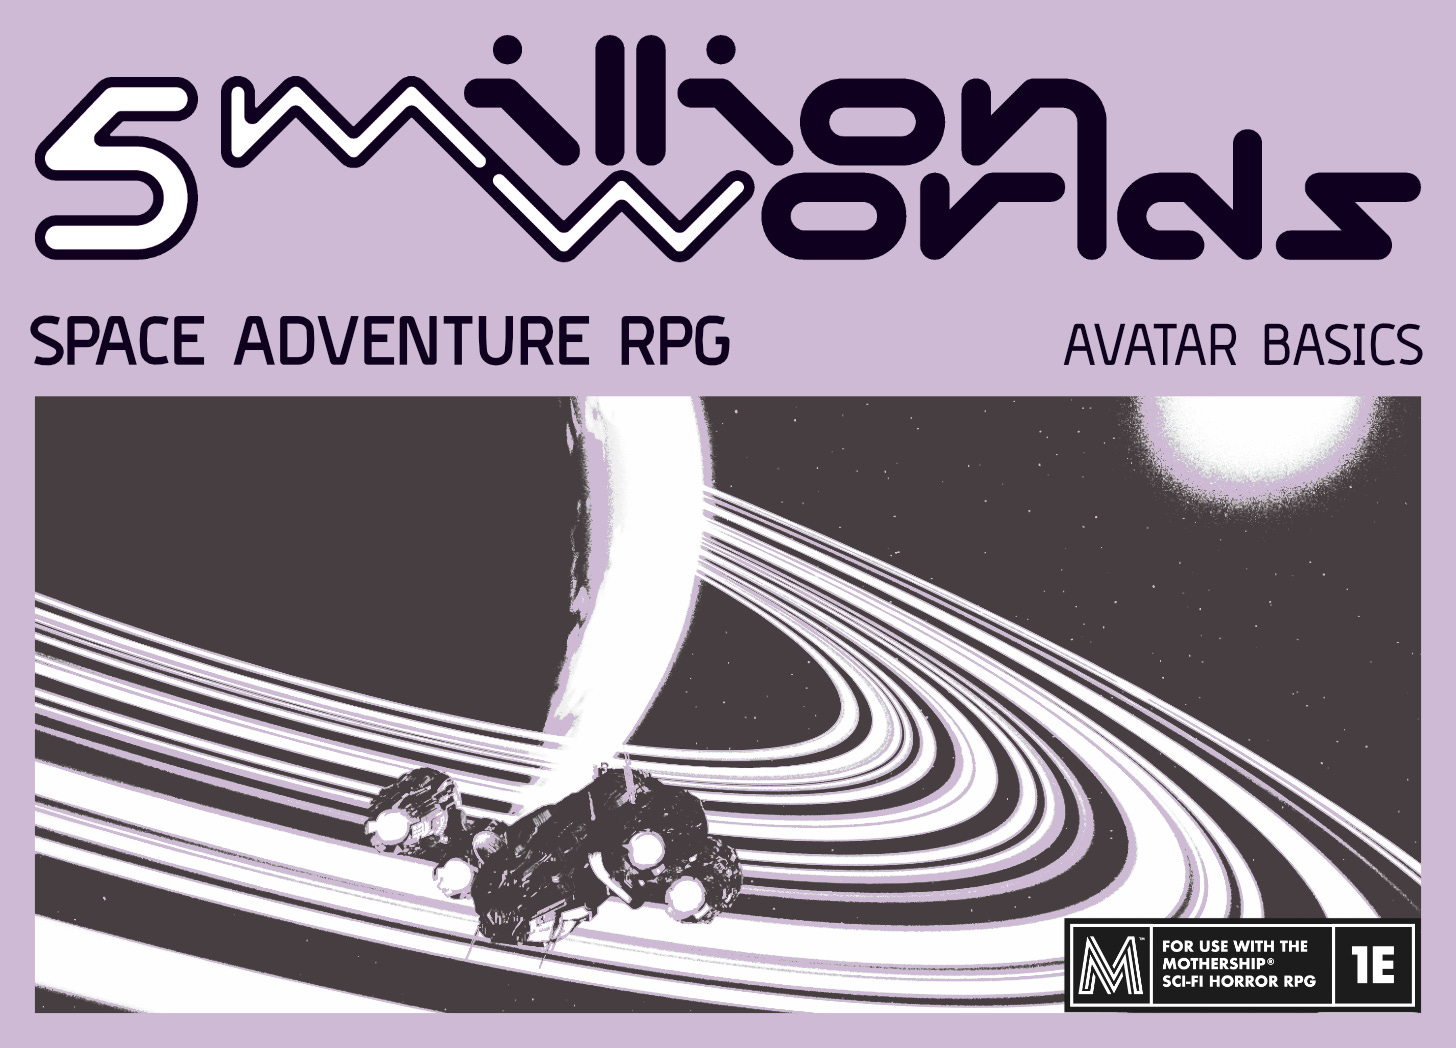 5 Million Worlds Space Adventure RPG: Avatar Basics. A spaceship flies over the rings of a gas giant; a star burns in the distance.